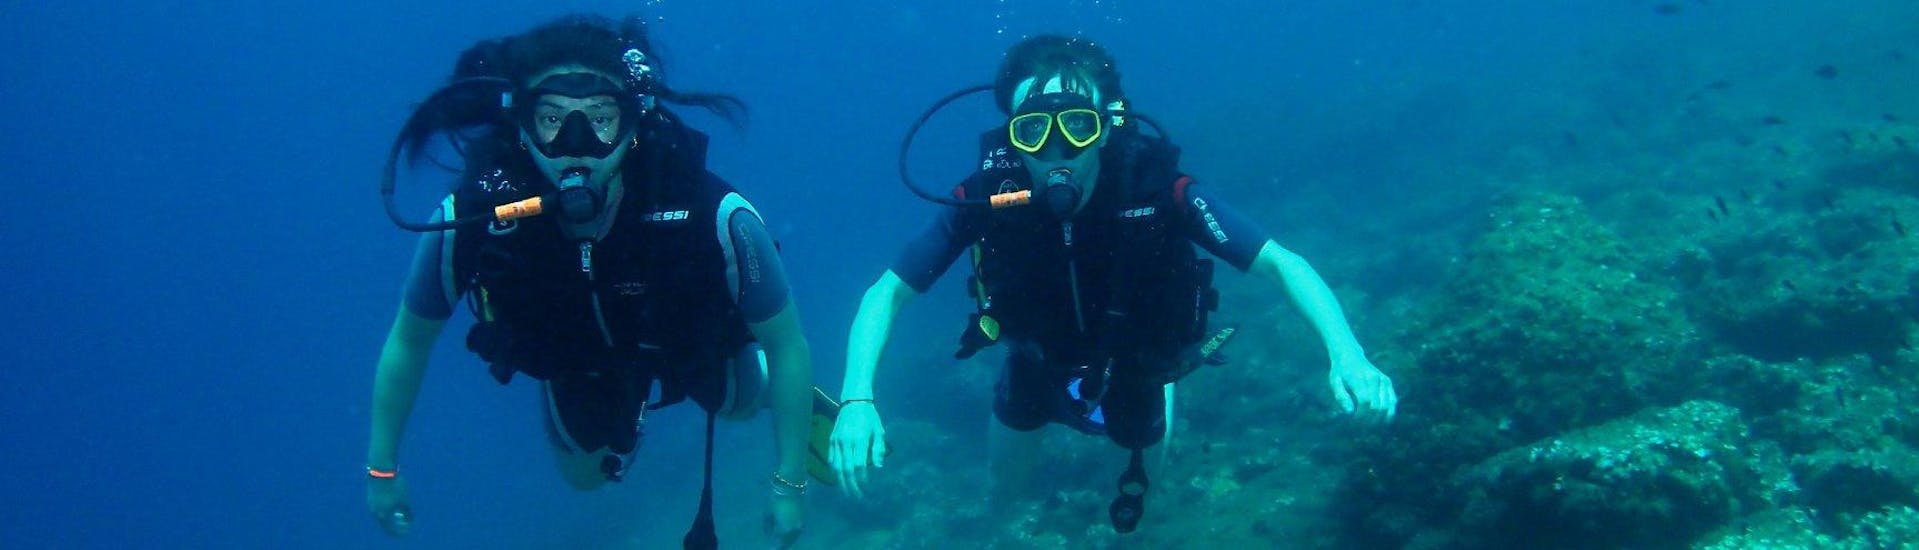 Two divers exploring the sea bed in Benidorm.